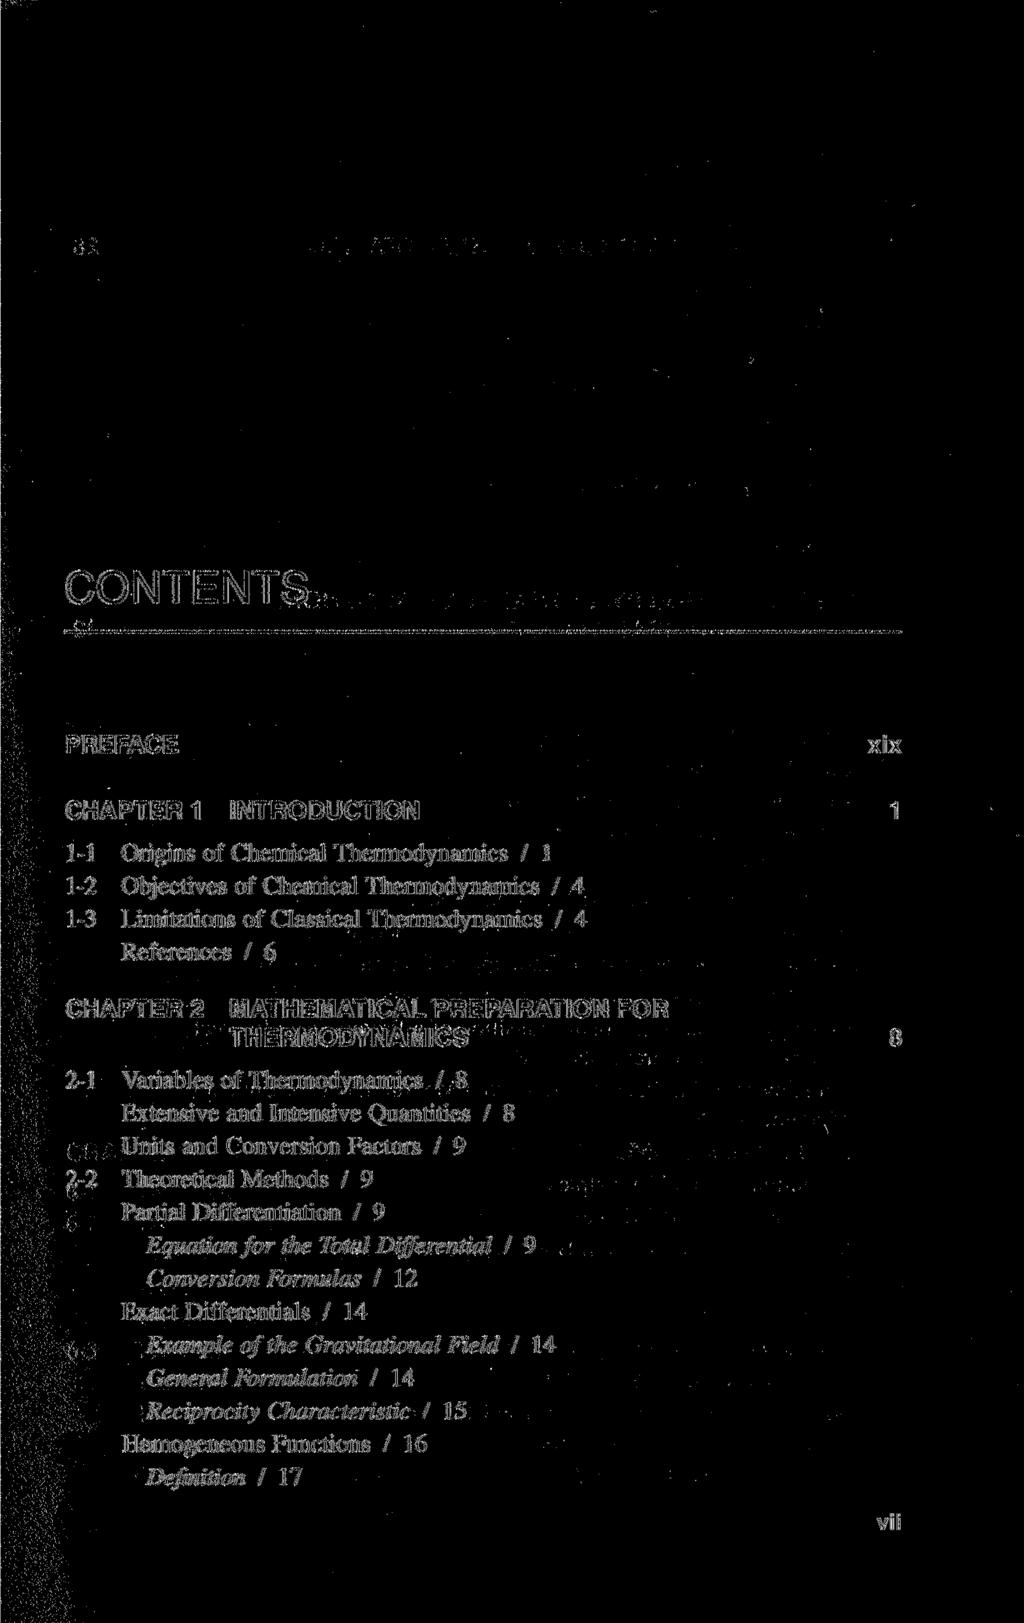 CONTENTS PREFACE xix CHAPTER 1 INTRODUCTION 1 1-1 Origins of Chemical Thermodynamics / 1 1-2 Objectives of Chemical Thermodynamics / 4 1-3 Limitations of Classical Thermodynamics / 4 References / 6